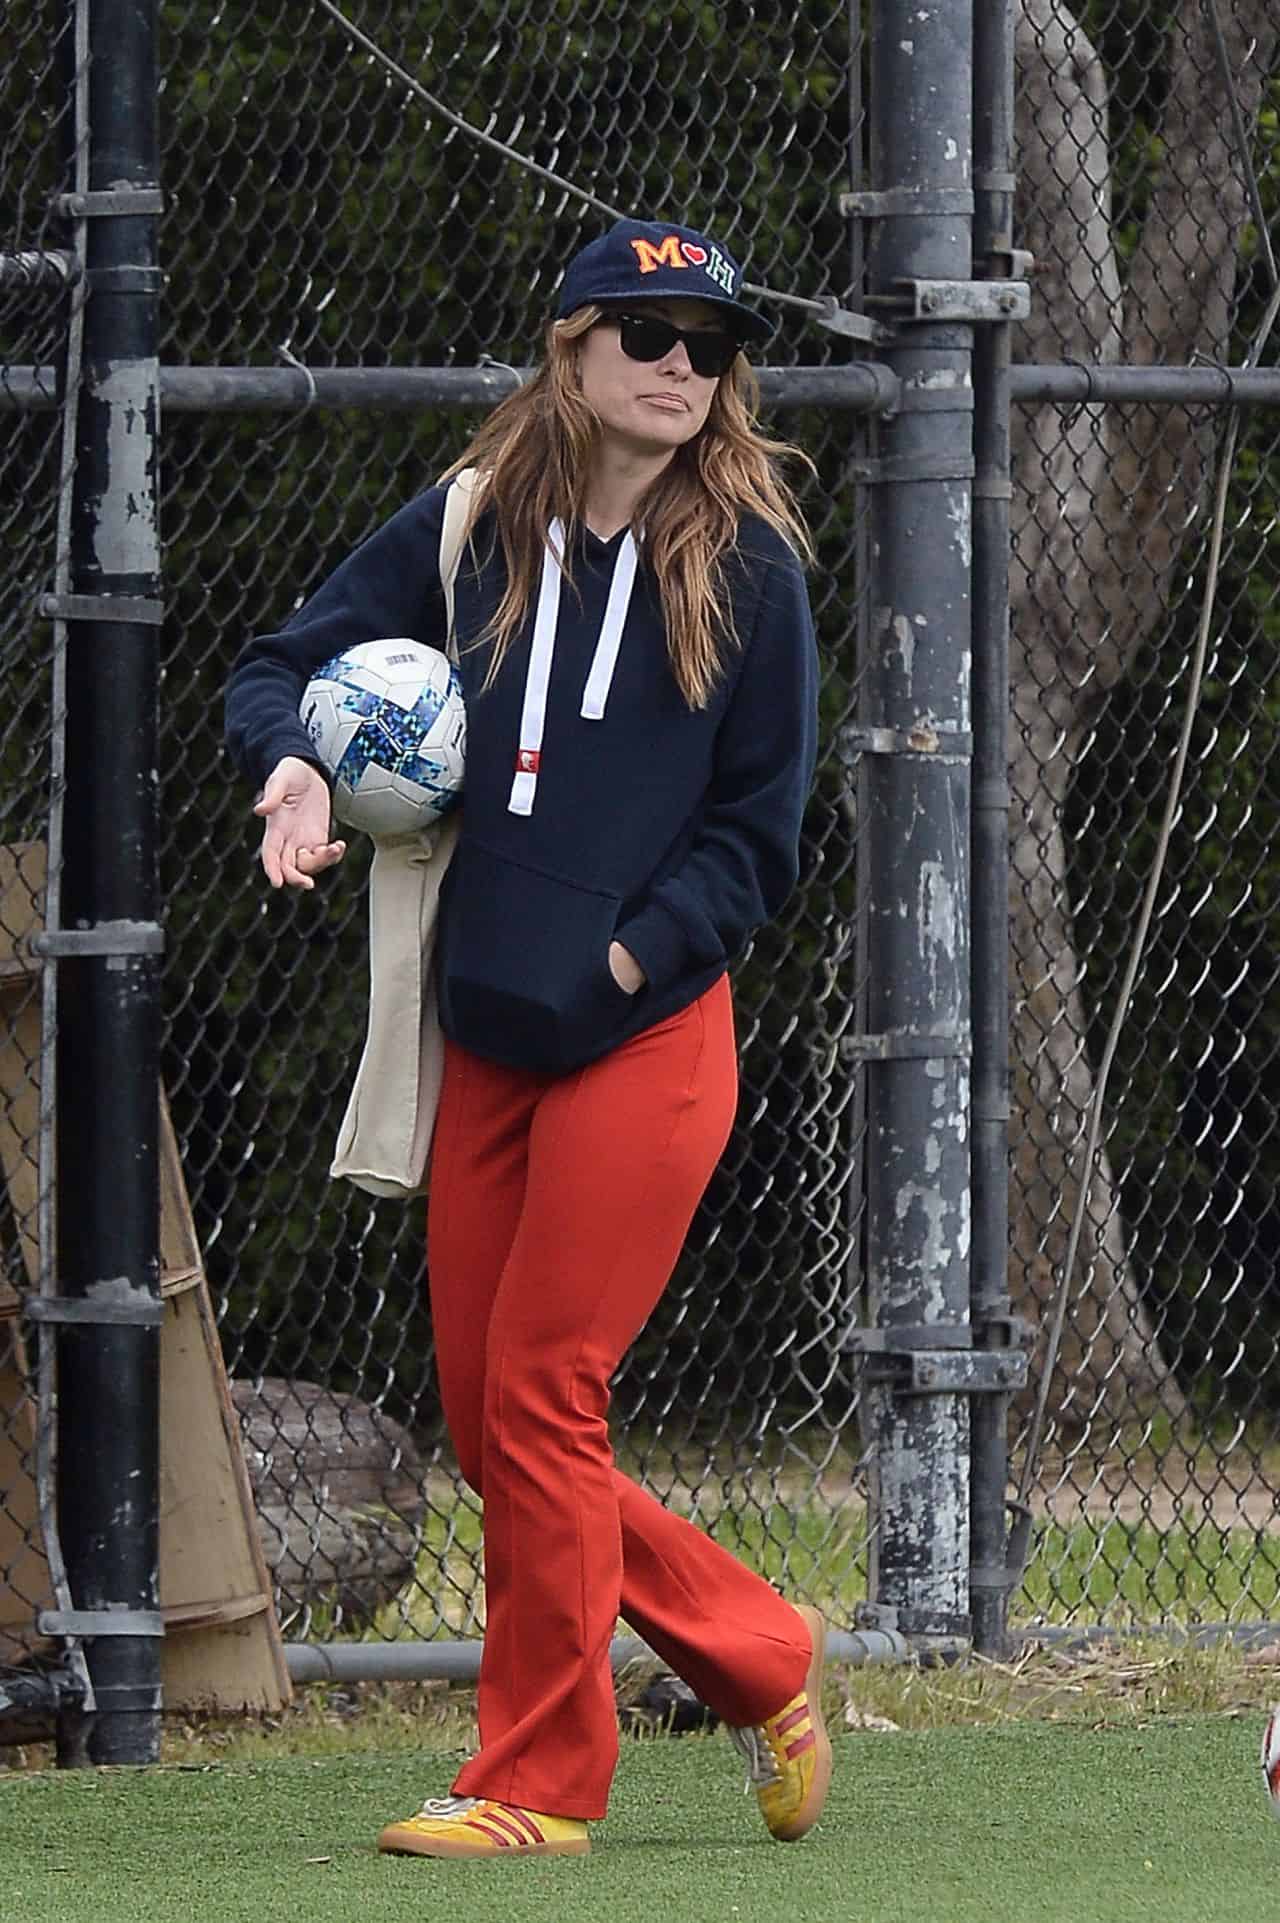 Olivia Wilde Warms Up and Shows her Flexibility Before Soccer Game